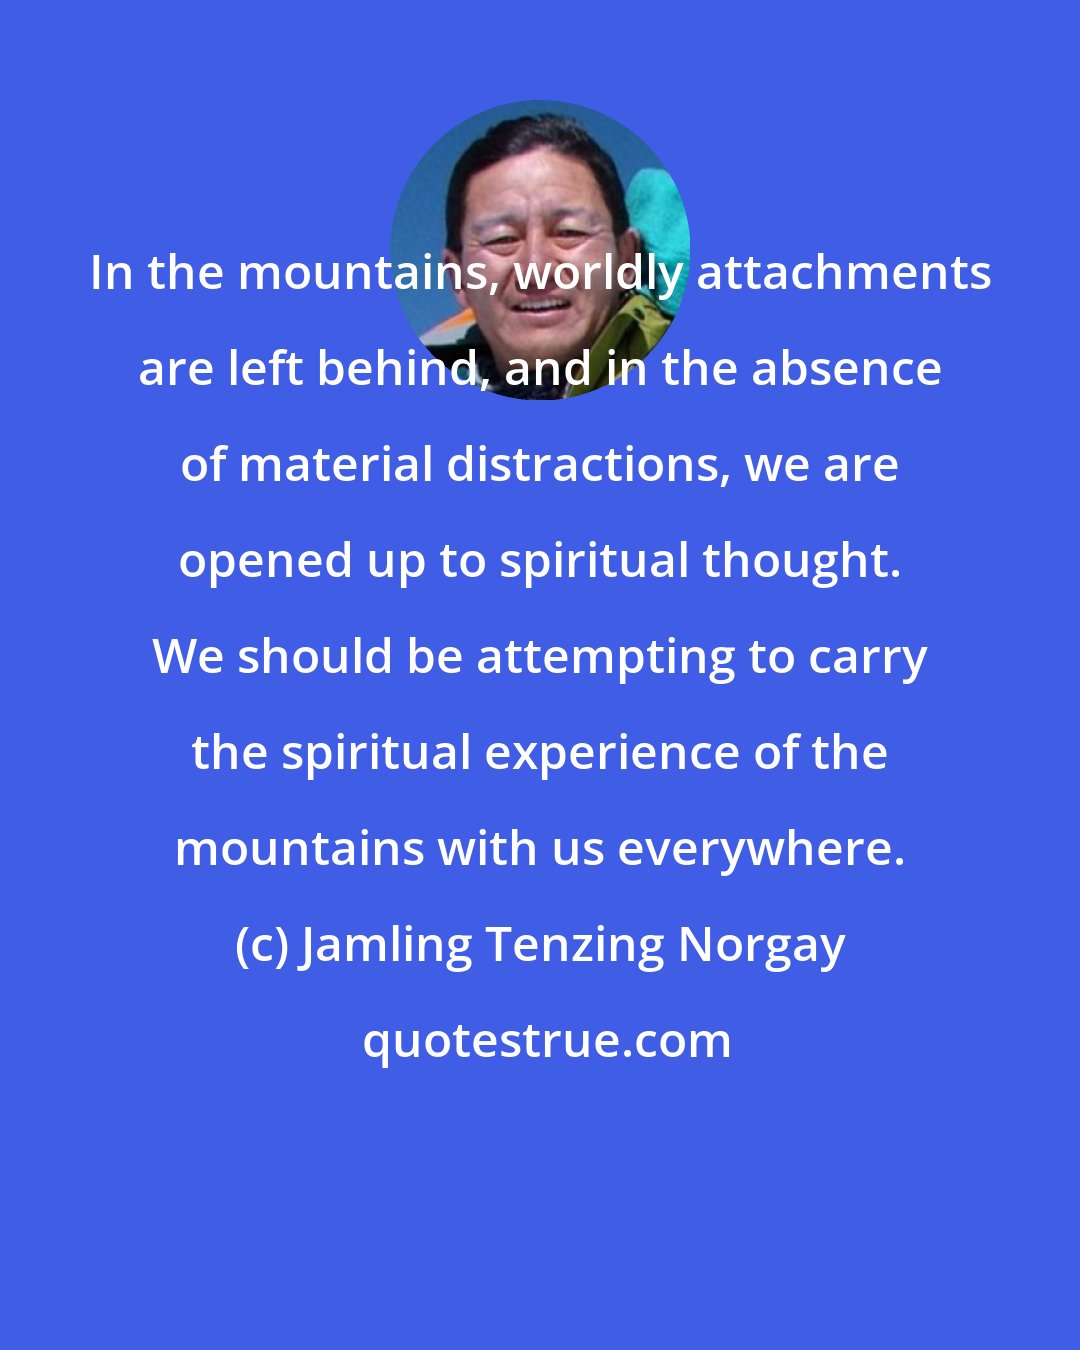 Jamling Tenzing Norgay: In the mountains, worldly attachments are left behind, and in the absence of material distractions, we are opened up to spiritual thought. We should be attempting to carry the spiritual experience of the mountains with us everywhere.